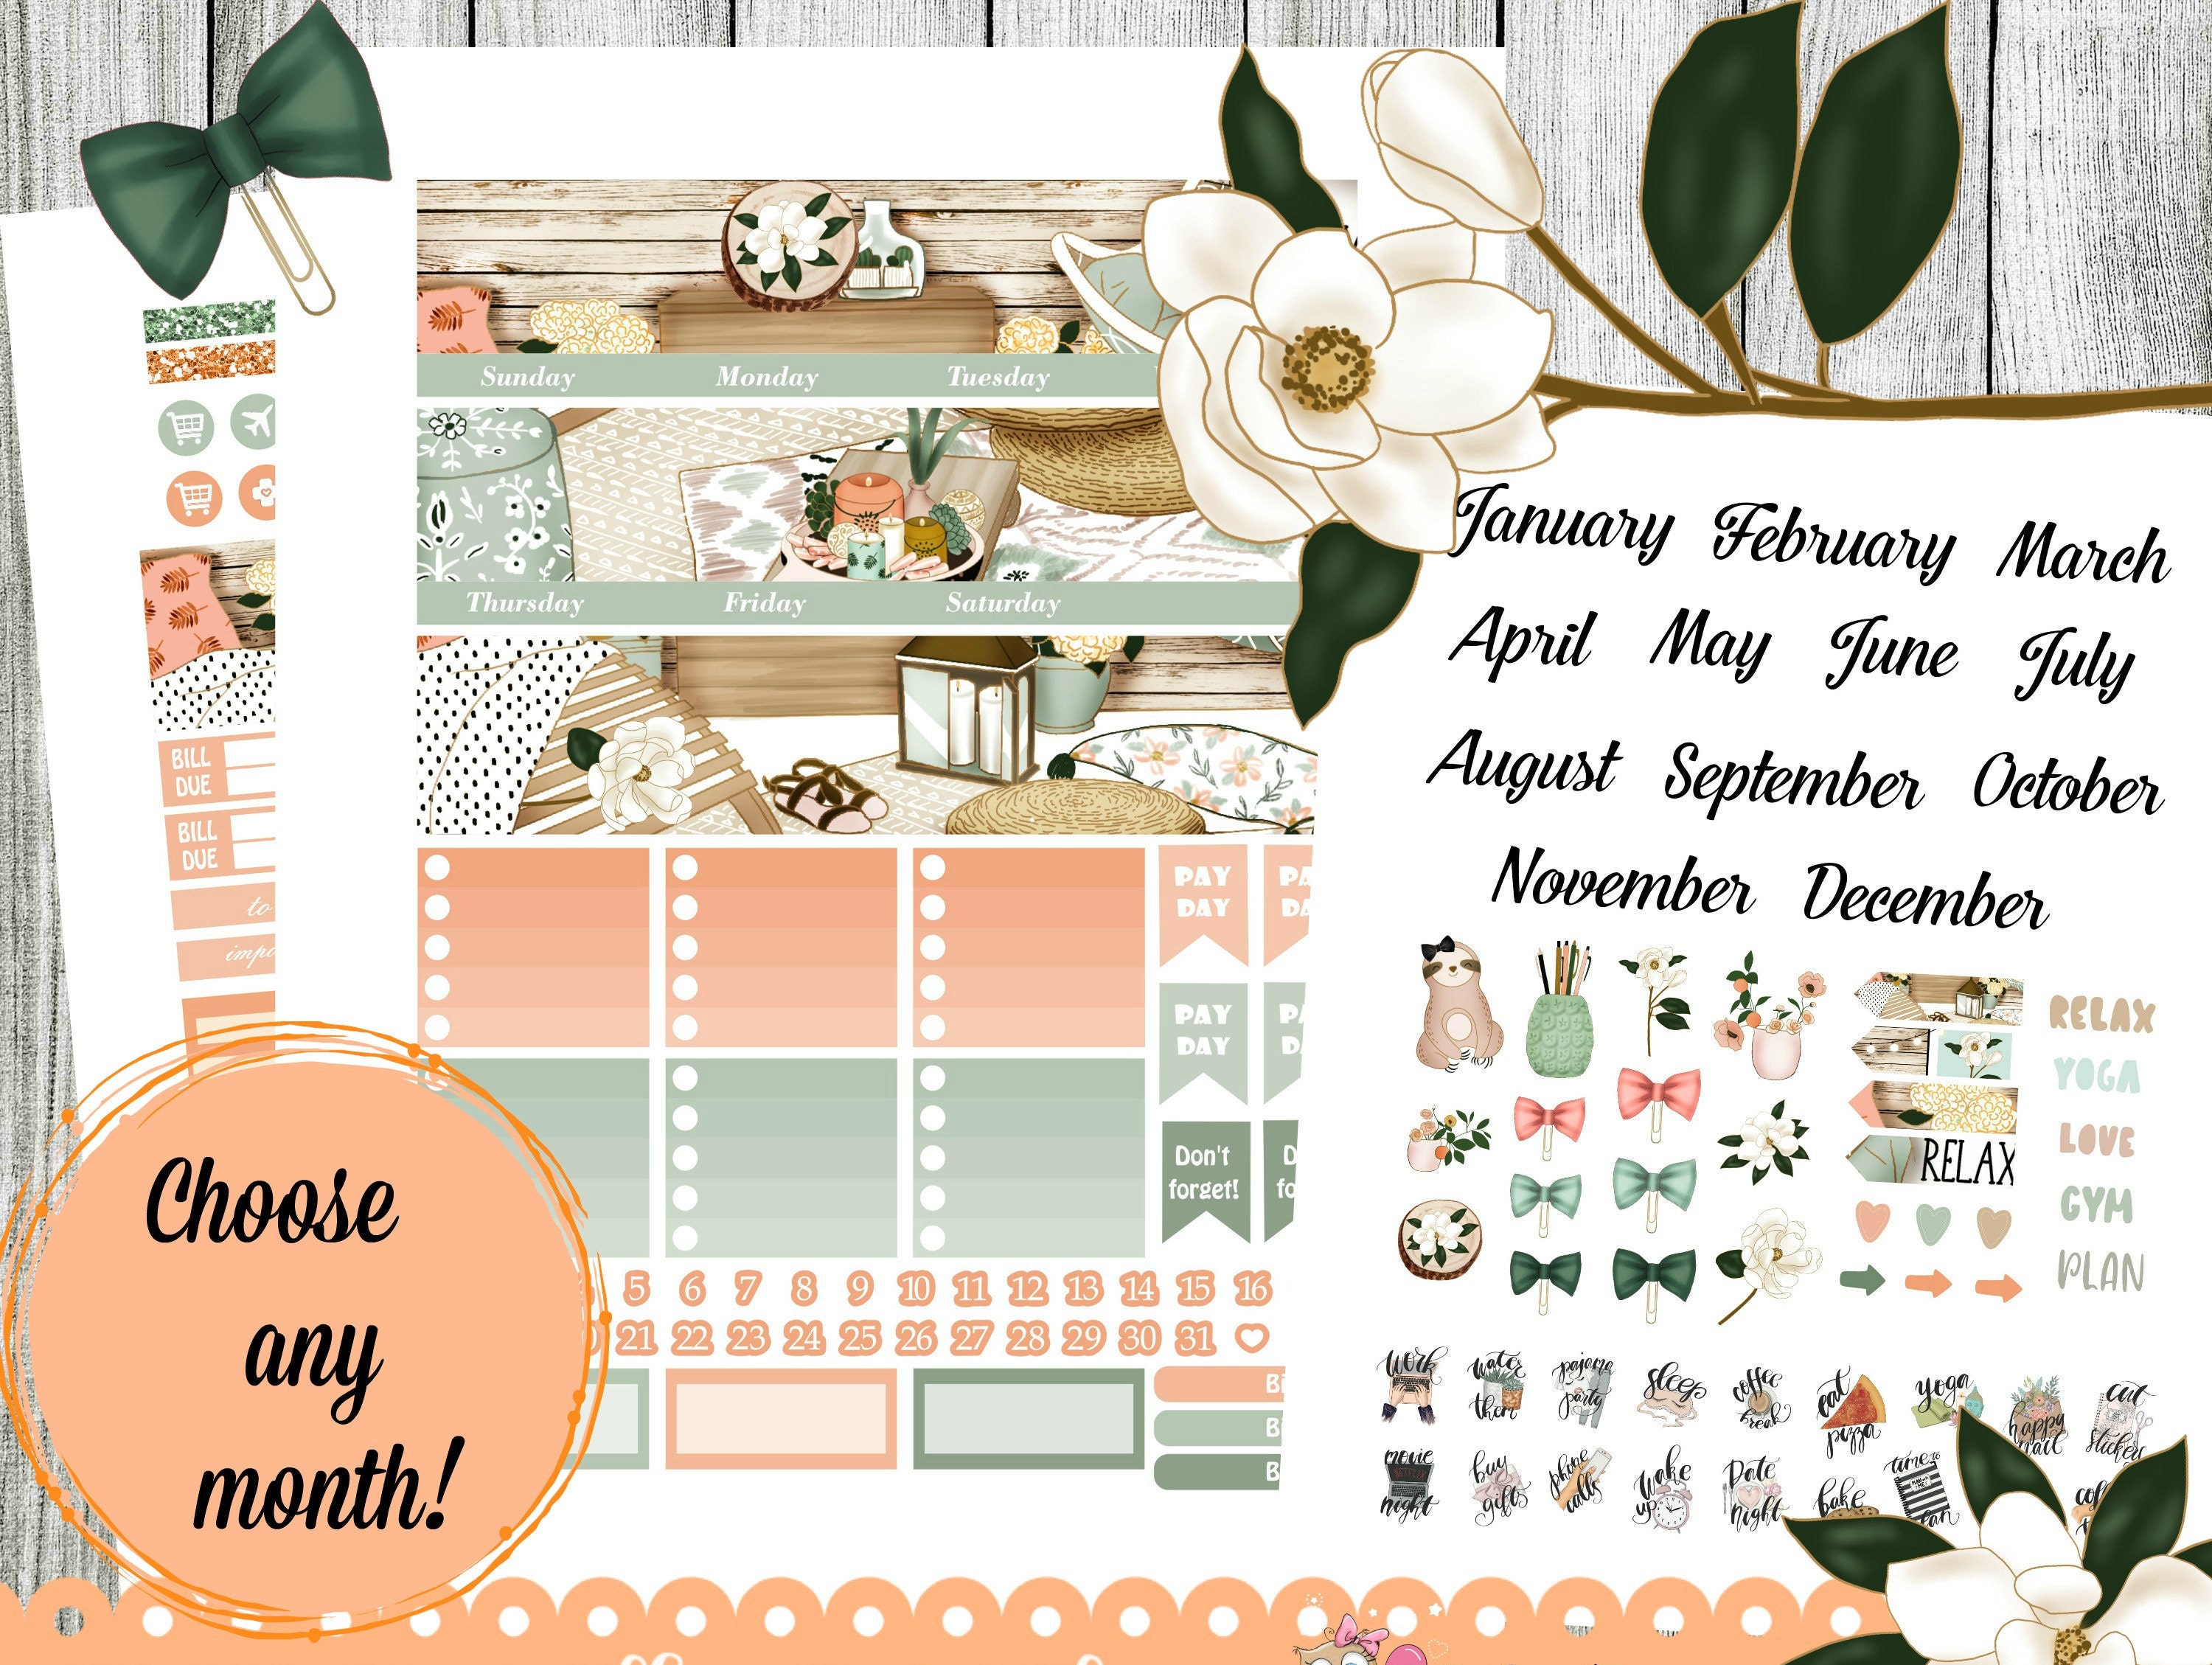 Printable Financial Planner Stickers ⋆ The Petite Planner